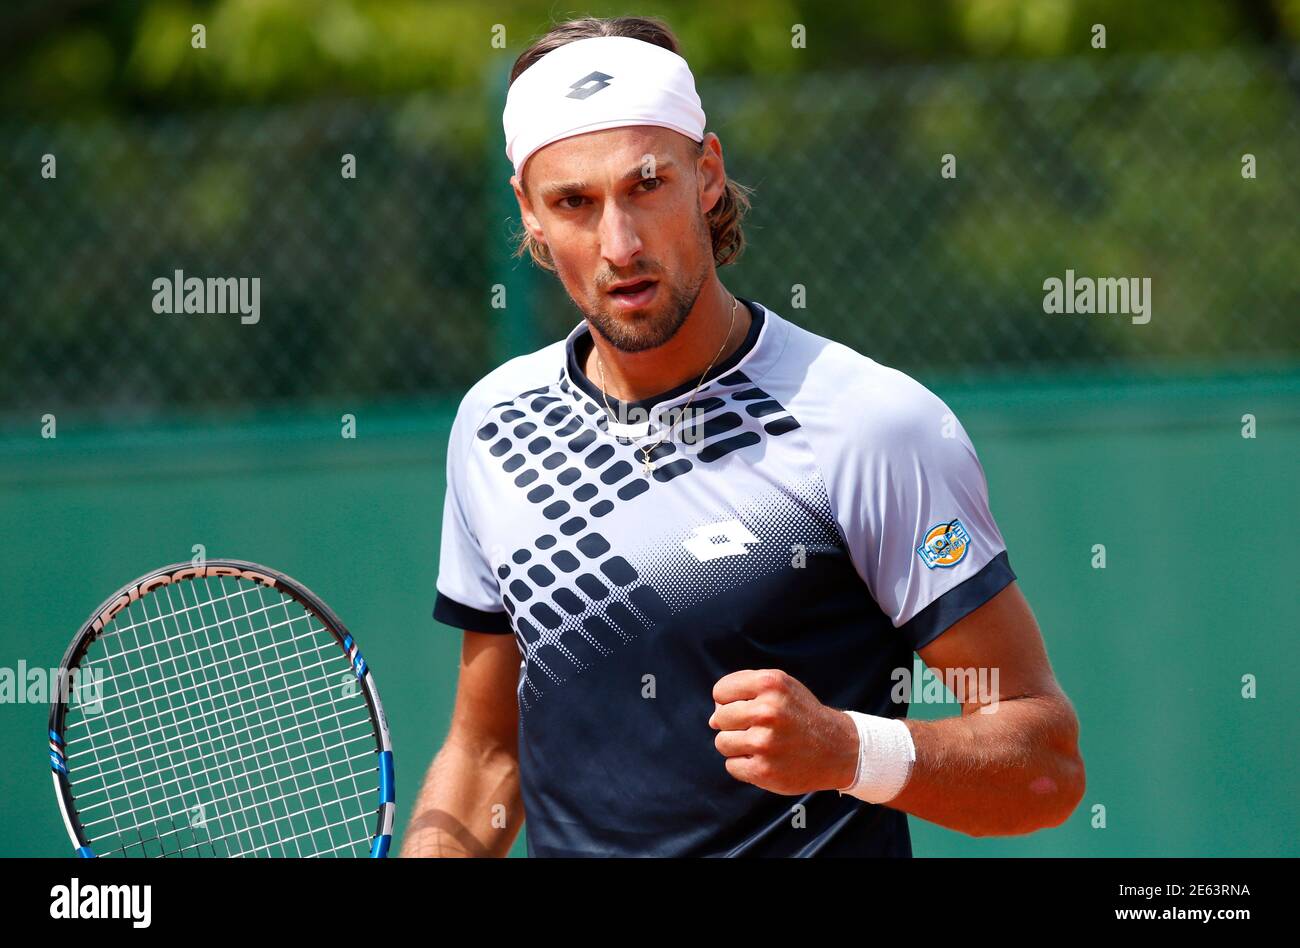 Ruben Bemelmans of Belgium reacts during his men's singles match against  Benjamin Becker of Germany at the French Open tennis tournament at the  Roland Garros stadium in Paris, France, May 25, 2015.